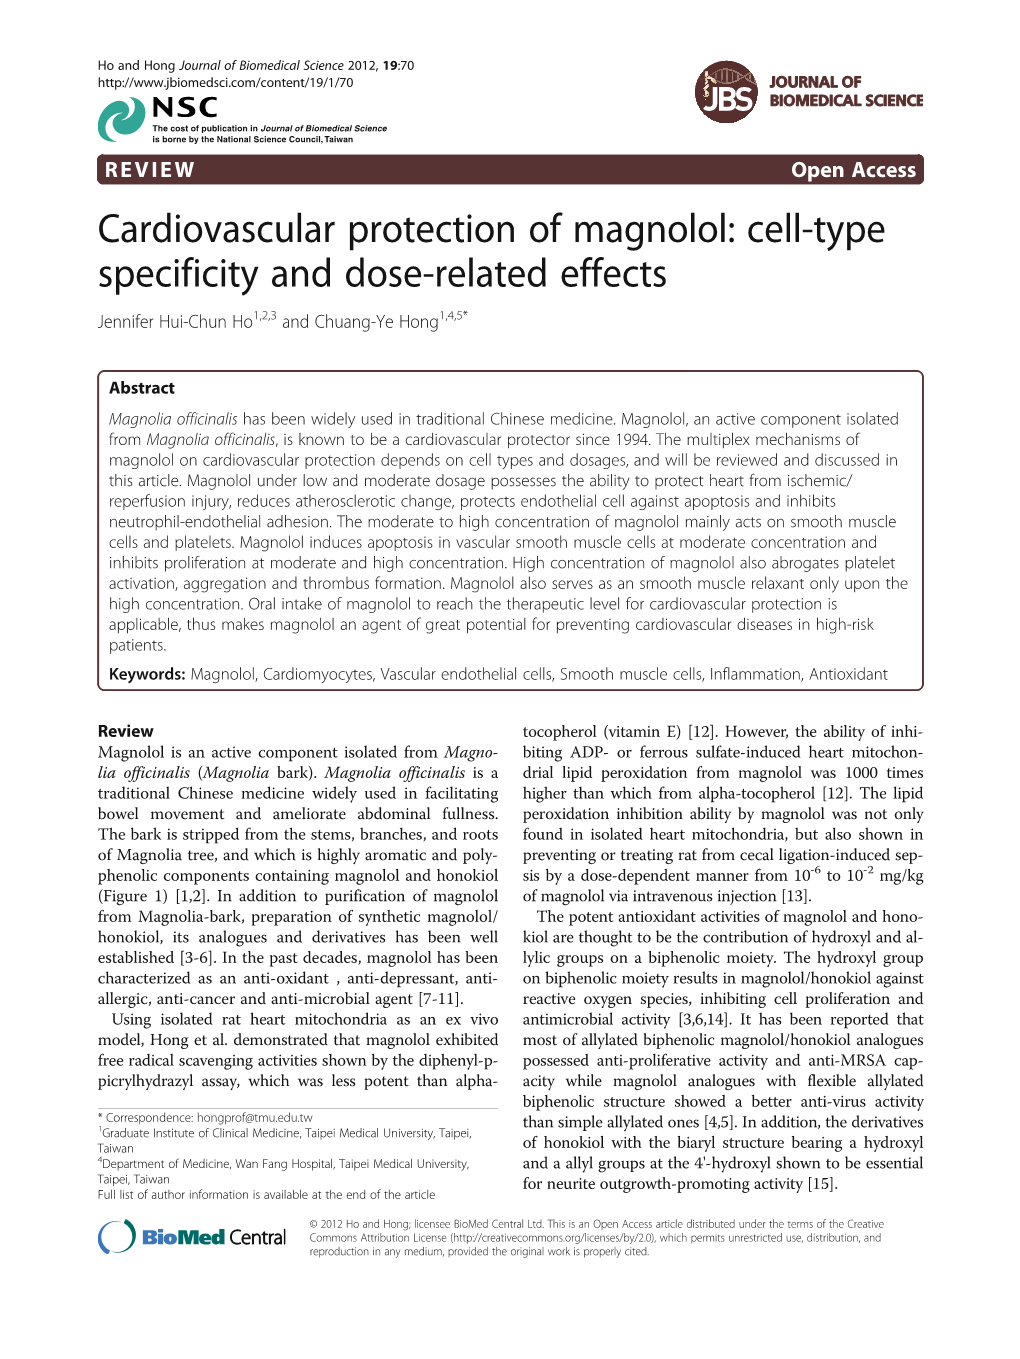 Cardiovascular Protection of Magnolol: Cell-Type Specificity and Dose-Related Effects Jennifer Hui-Chun Ho1,2,3 and Chuang-Ye Hong1,4,5*